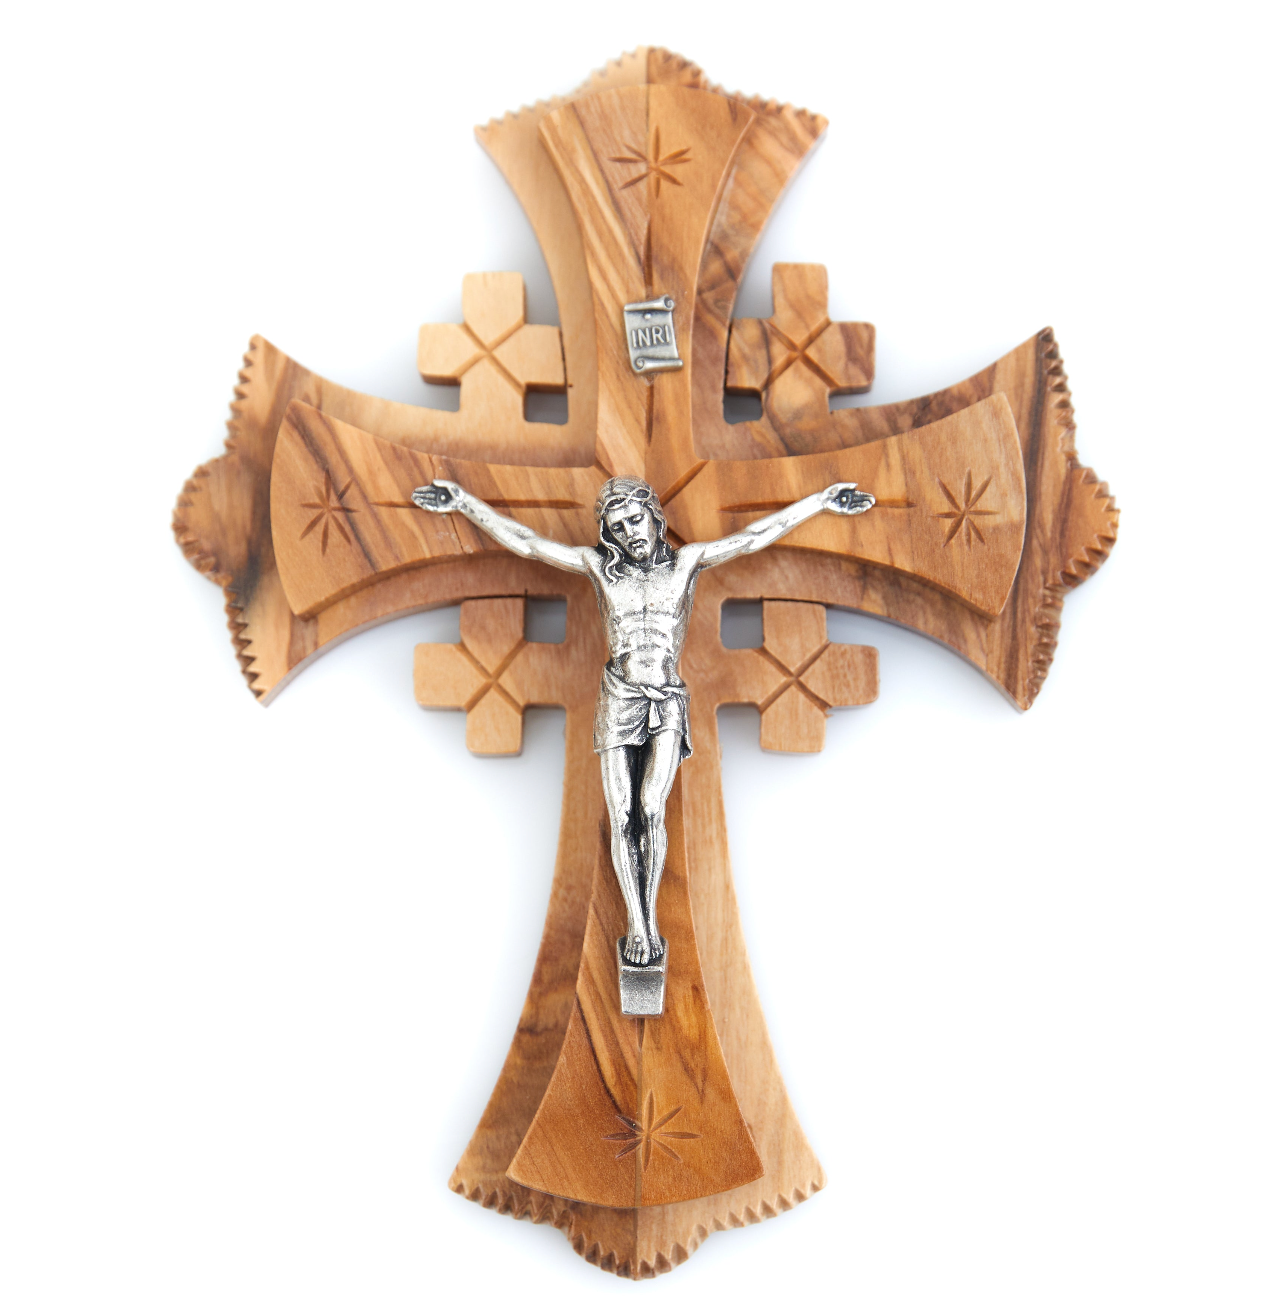 Jerusalem Crucifix Wall Cross, Wooden Hand Made from Holy Land Olive Wood, 7 Inches, 4 Crosses